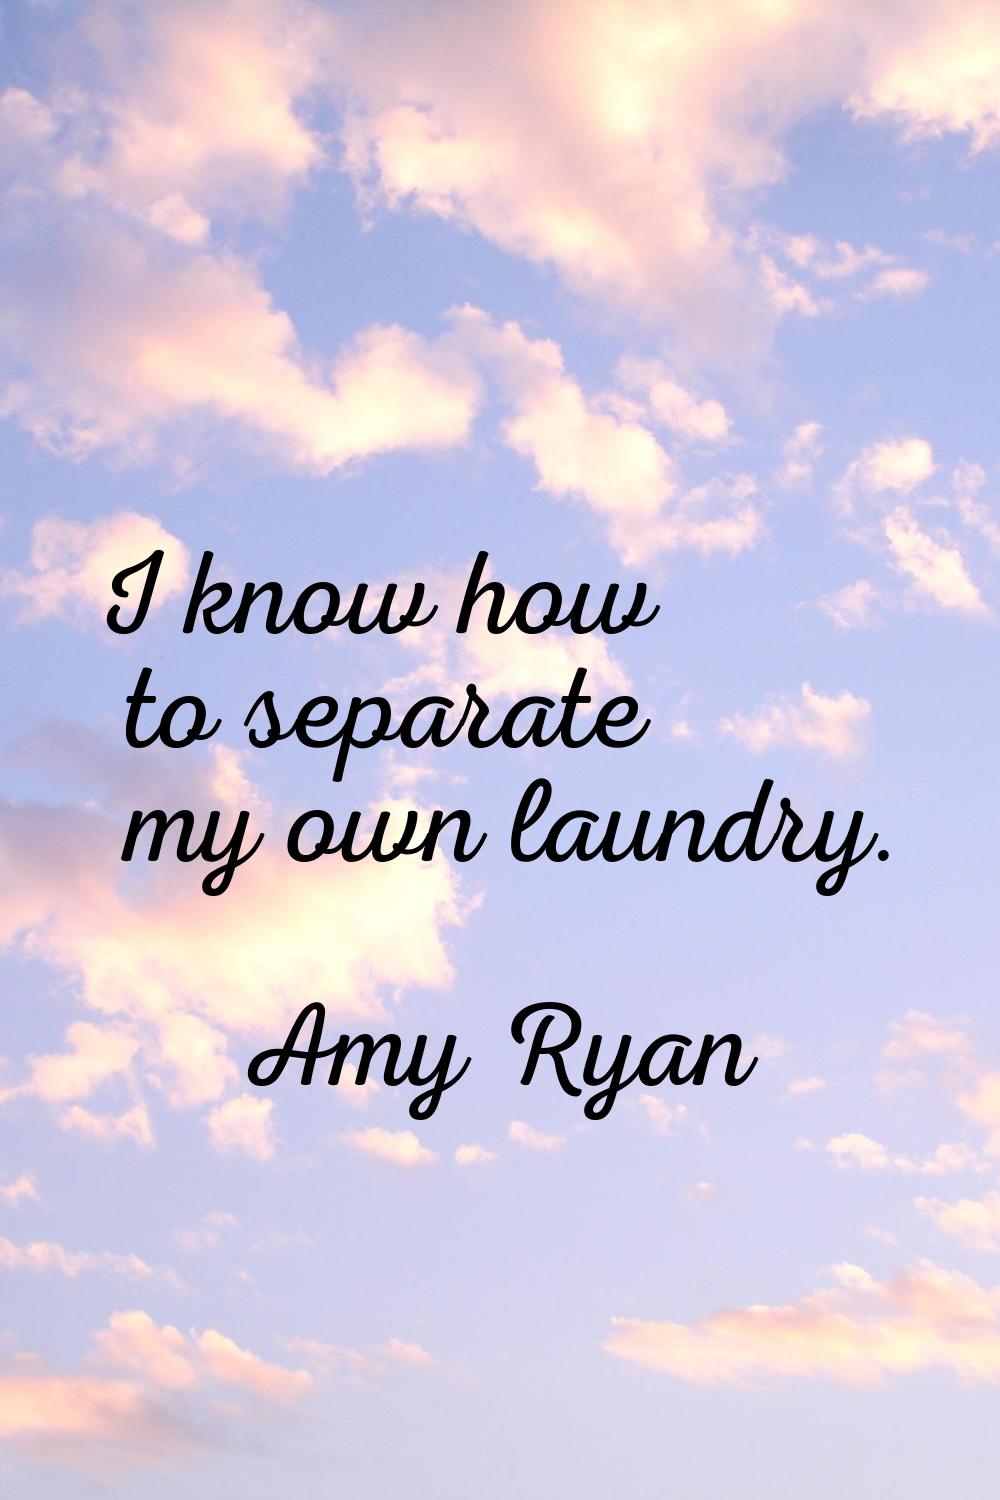 I know how to separate my own laundry.